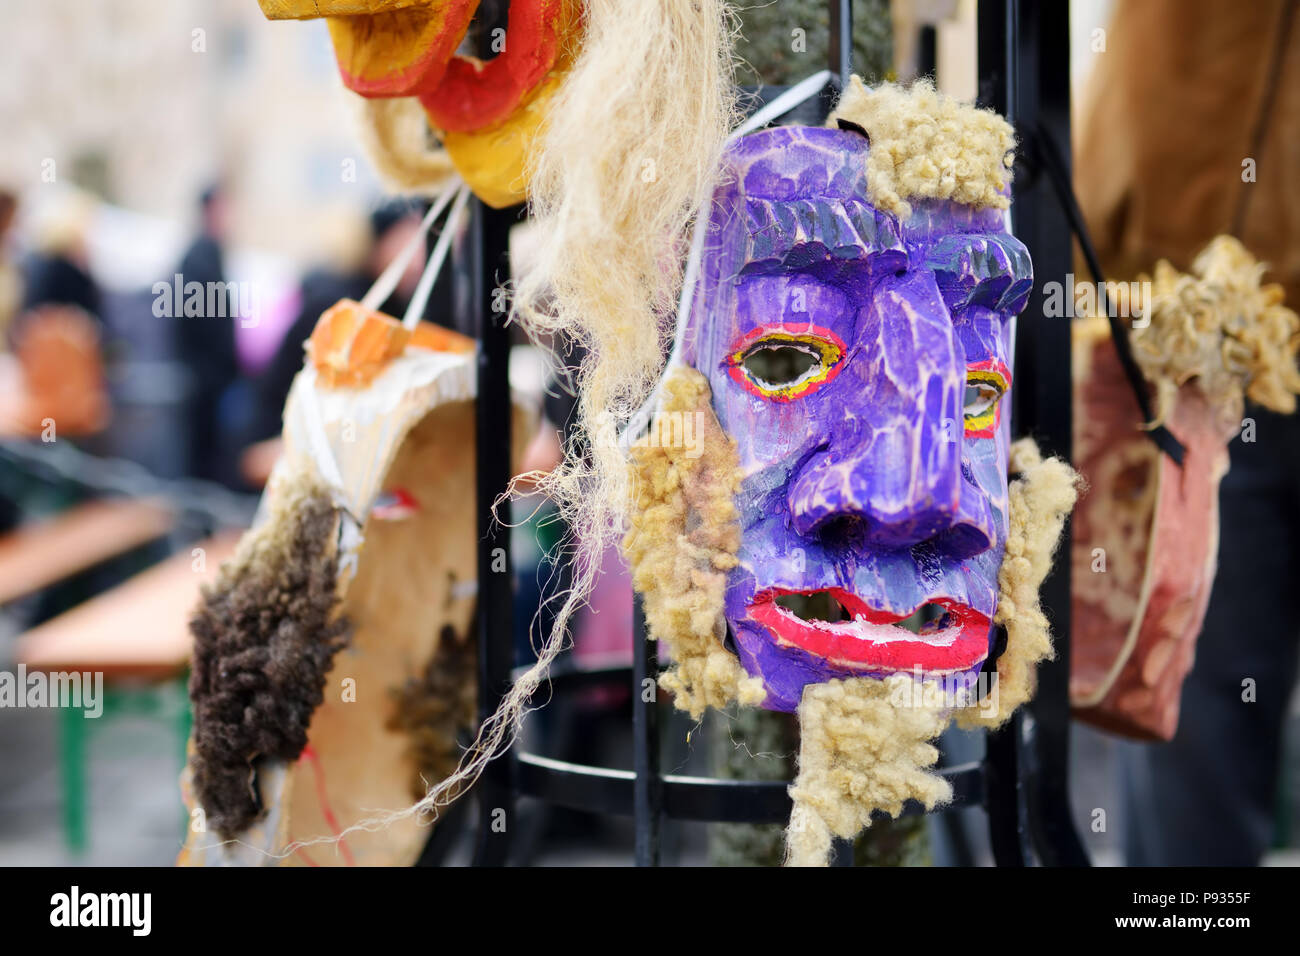 Wooden maks weared to celebrate Uzgavenes, a Lithuanian annual folk festival taking place seven weeks before Easter. Stock Photo